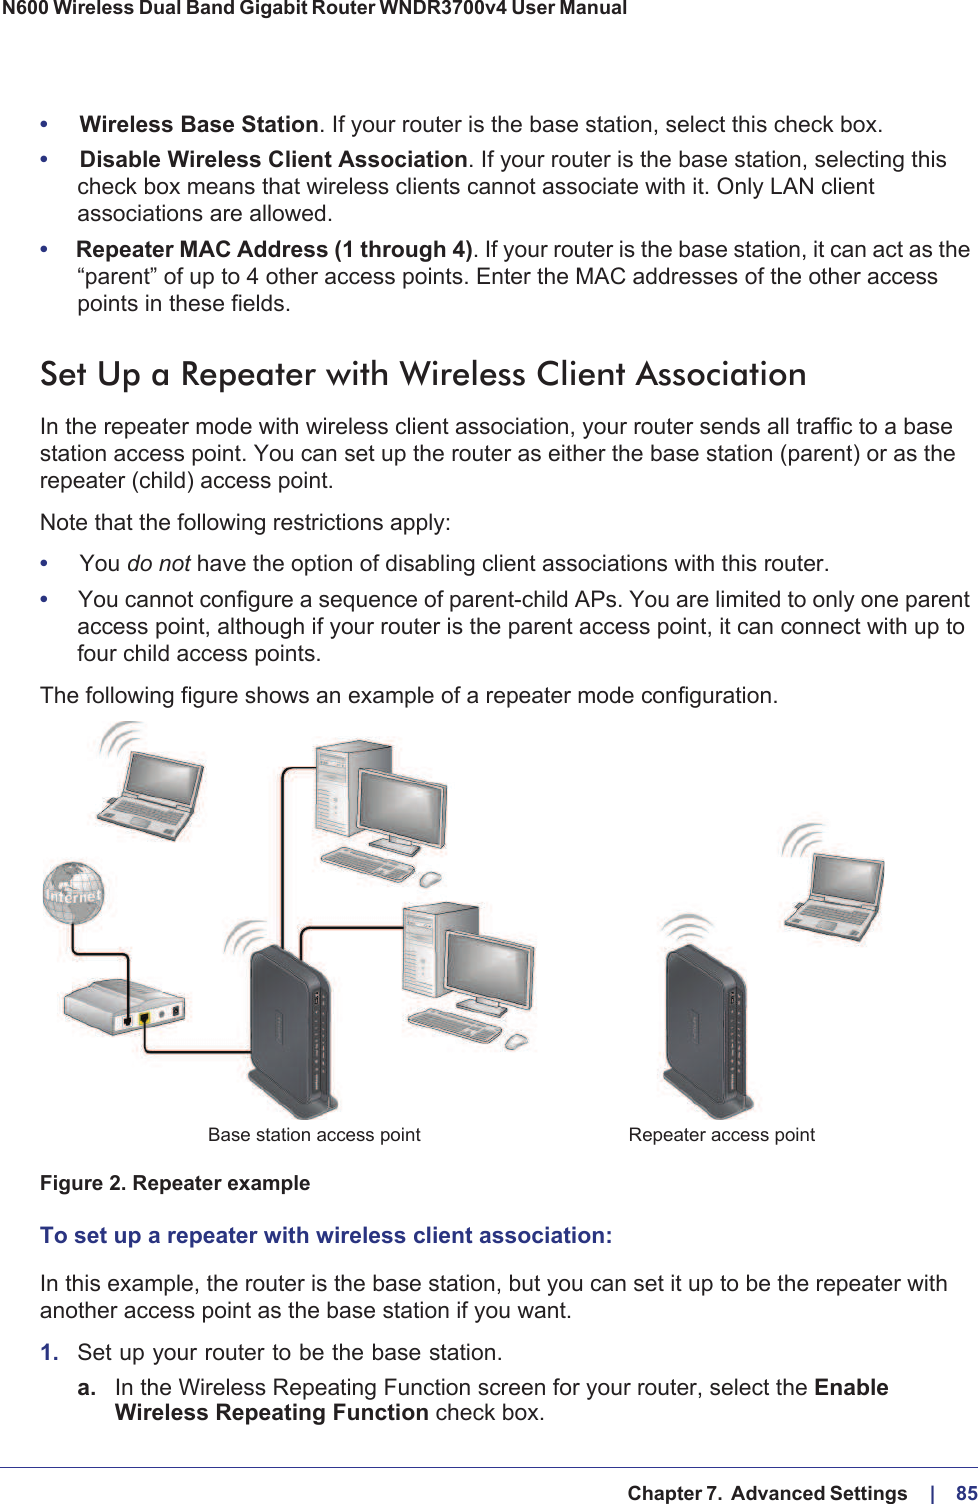   Chapter 7.  Advanced Settings     |    85N600 Wireless Dual Band Gigabit Router WNDR3700v4 User Manual •Wireless Base Station. If your router is the base station, select this check box.•Disable Wireless Client Association. If your router is the base station, selecting this check box means that wireless clients cannot associate with it. Only LAN client associations are allowed.•Repeater MAC Address (1 through 4). If your router is the base station, it can act as the “parent” of up to 4 other access points. Enter the MAC addresses of the other access points in these fields.Set Up a Repeater with Wireless Client AssociationIn the repeater mode with wireless client association, your router sends all traffic to a base station access point. You can set up the router as either the base station (parent) or as the repeater (child) access point. Note that the following restrictions apply:•You do not have the option of disabling client associations with this router. •You cannot configure a sequence of parent-child APs. You are limited to only one parent access point, although if your router is the parent access point, it can connect with up to four child access points. The following figure shows an example of a repeater mode configuration.Repeater access pointBase station access point Figure 2. Repeater exampleTo set up a repeater with wireless client association:In this example, the router is the base station, but you can set it up to be the repeater with another access point as the base station if you want.1. Set up your router to be the base station.a. In the Wireless Repeating Function screen for your router, select the EnableWireless Repeating Function check box.